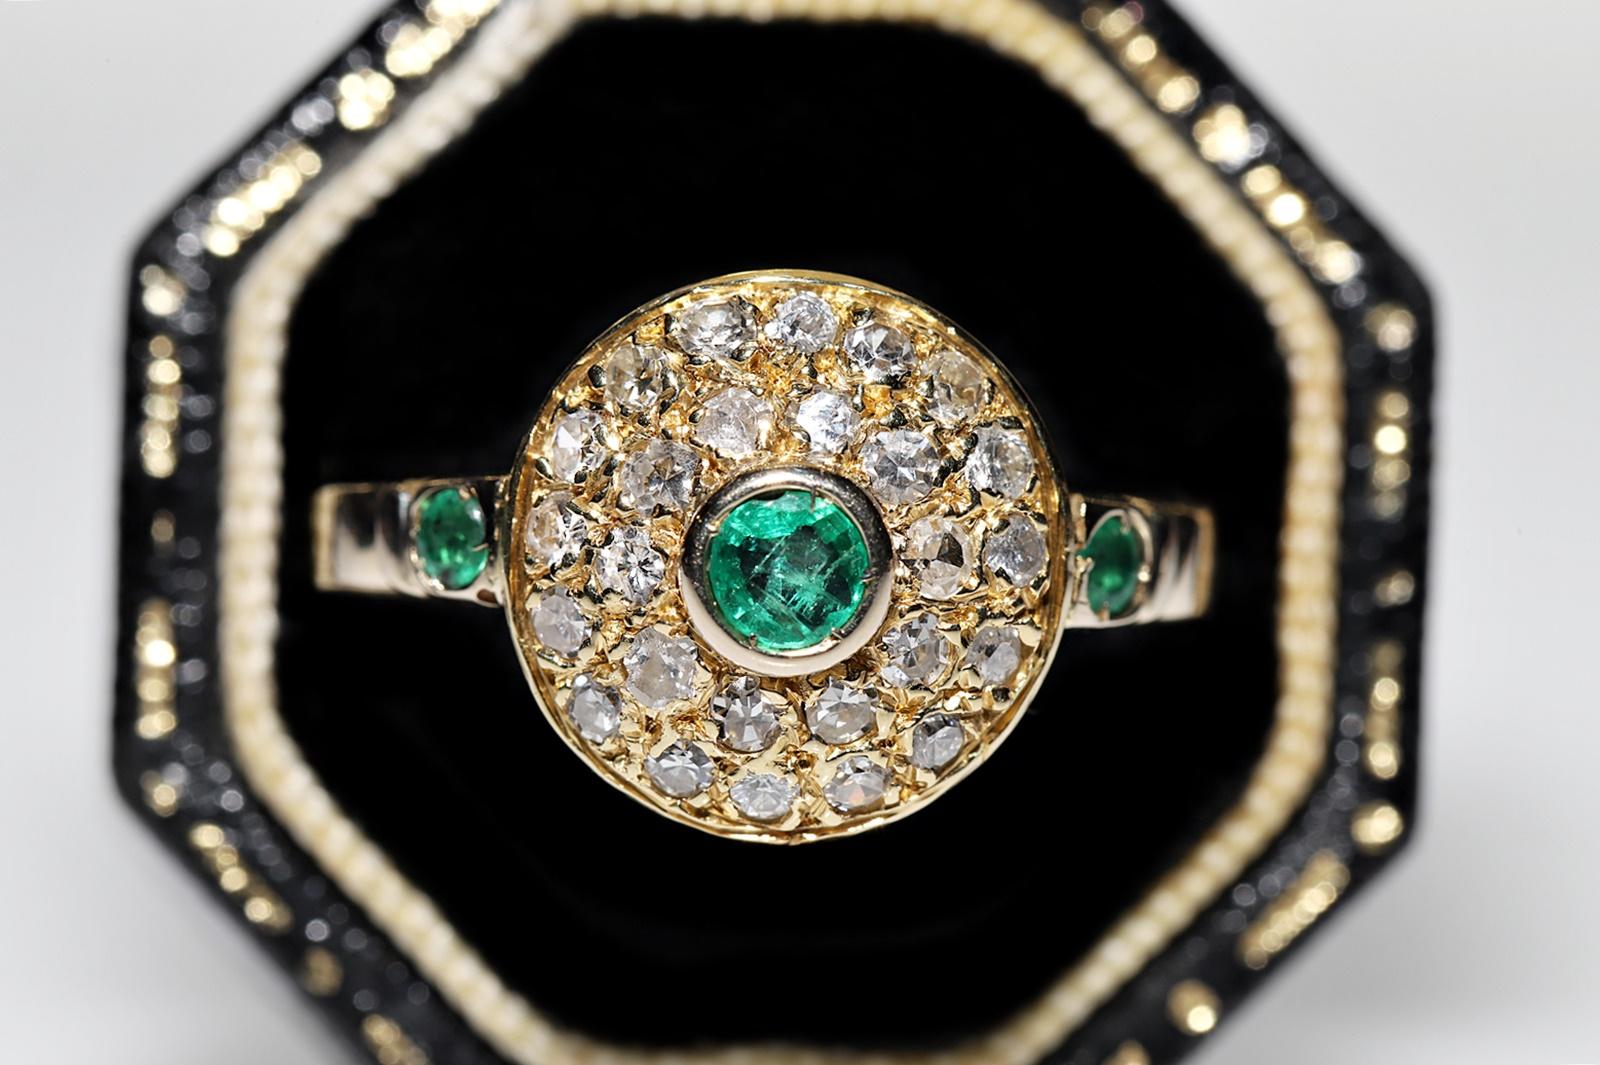 Vintage 18k Gold Circa 1960s Natural Diamond And Emerald Decorated Ring 
In very good condition.
Total weight is 4 grams.
Total diamond is 0.55 ct.
The diamond has vs-s1-s2-s3 clarity and H-I color.
Totally is emerald about 0.40 ct.
Ring size is US